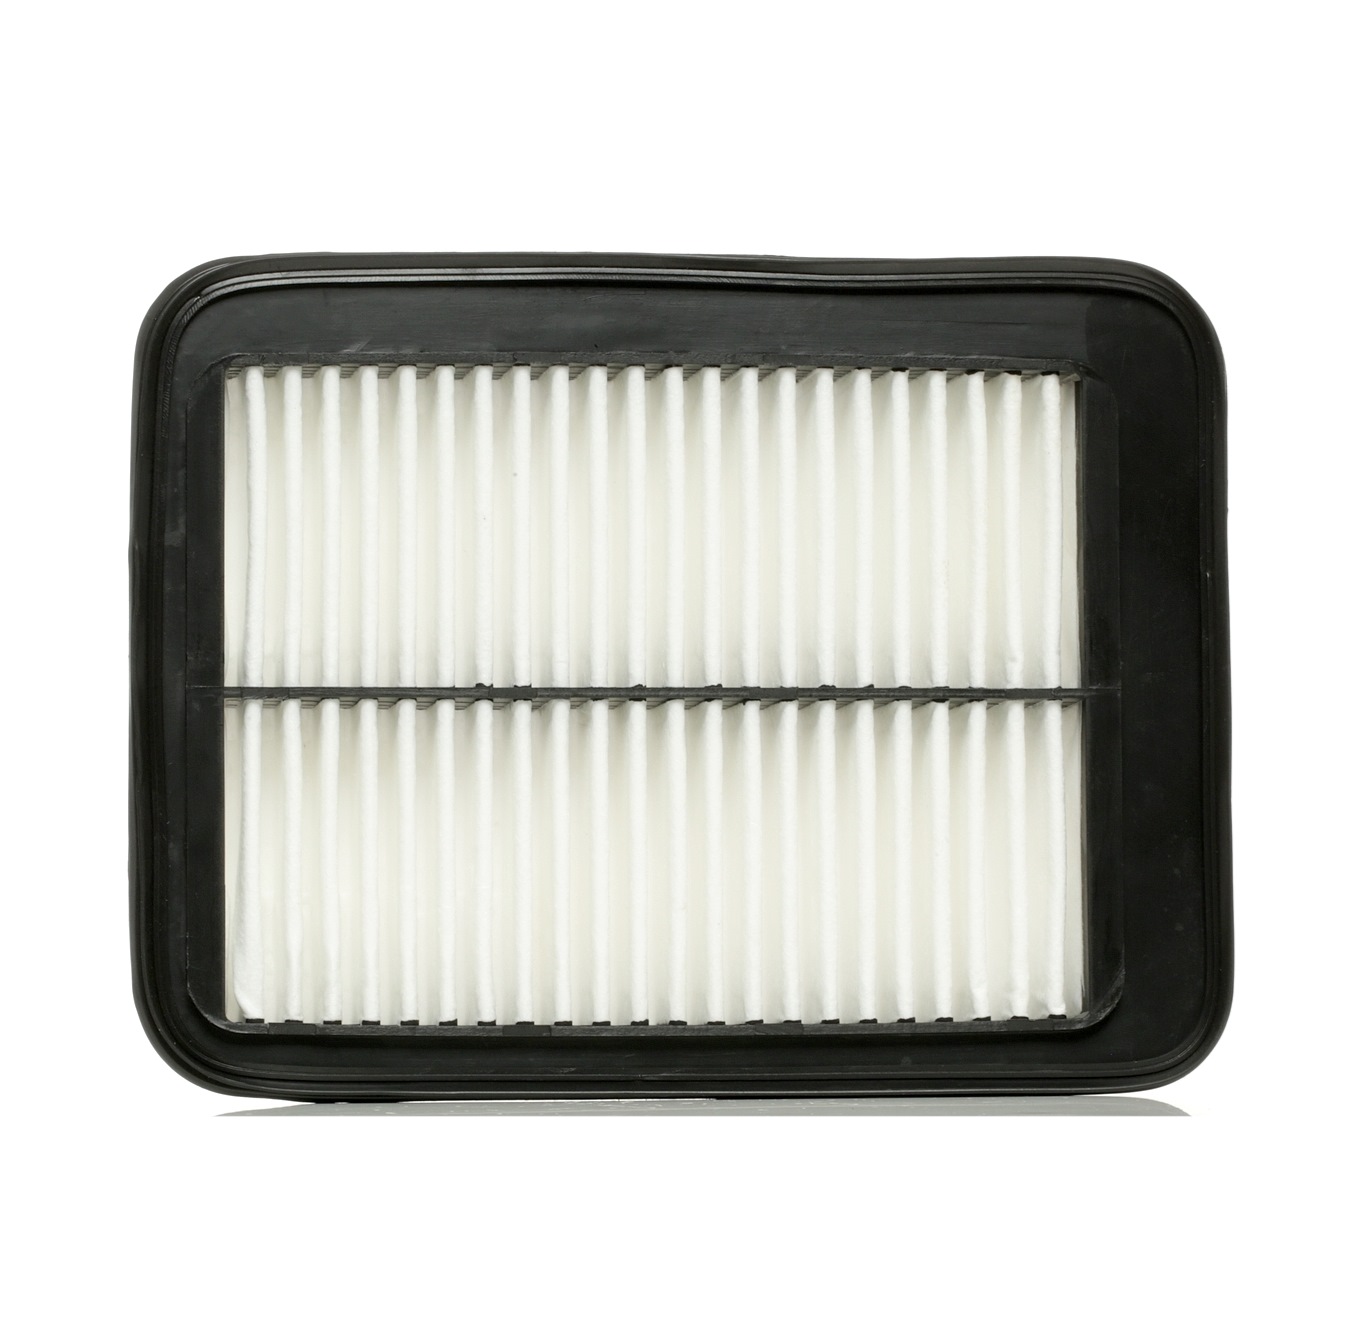 MAPCO 35mm, 178mm, 235mm, Filter Insert Length: 235mm, Width: 178mm, Height: 35mm Engine air filter 60593 buy